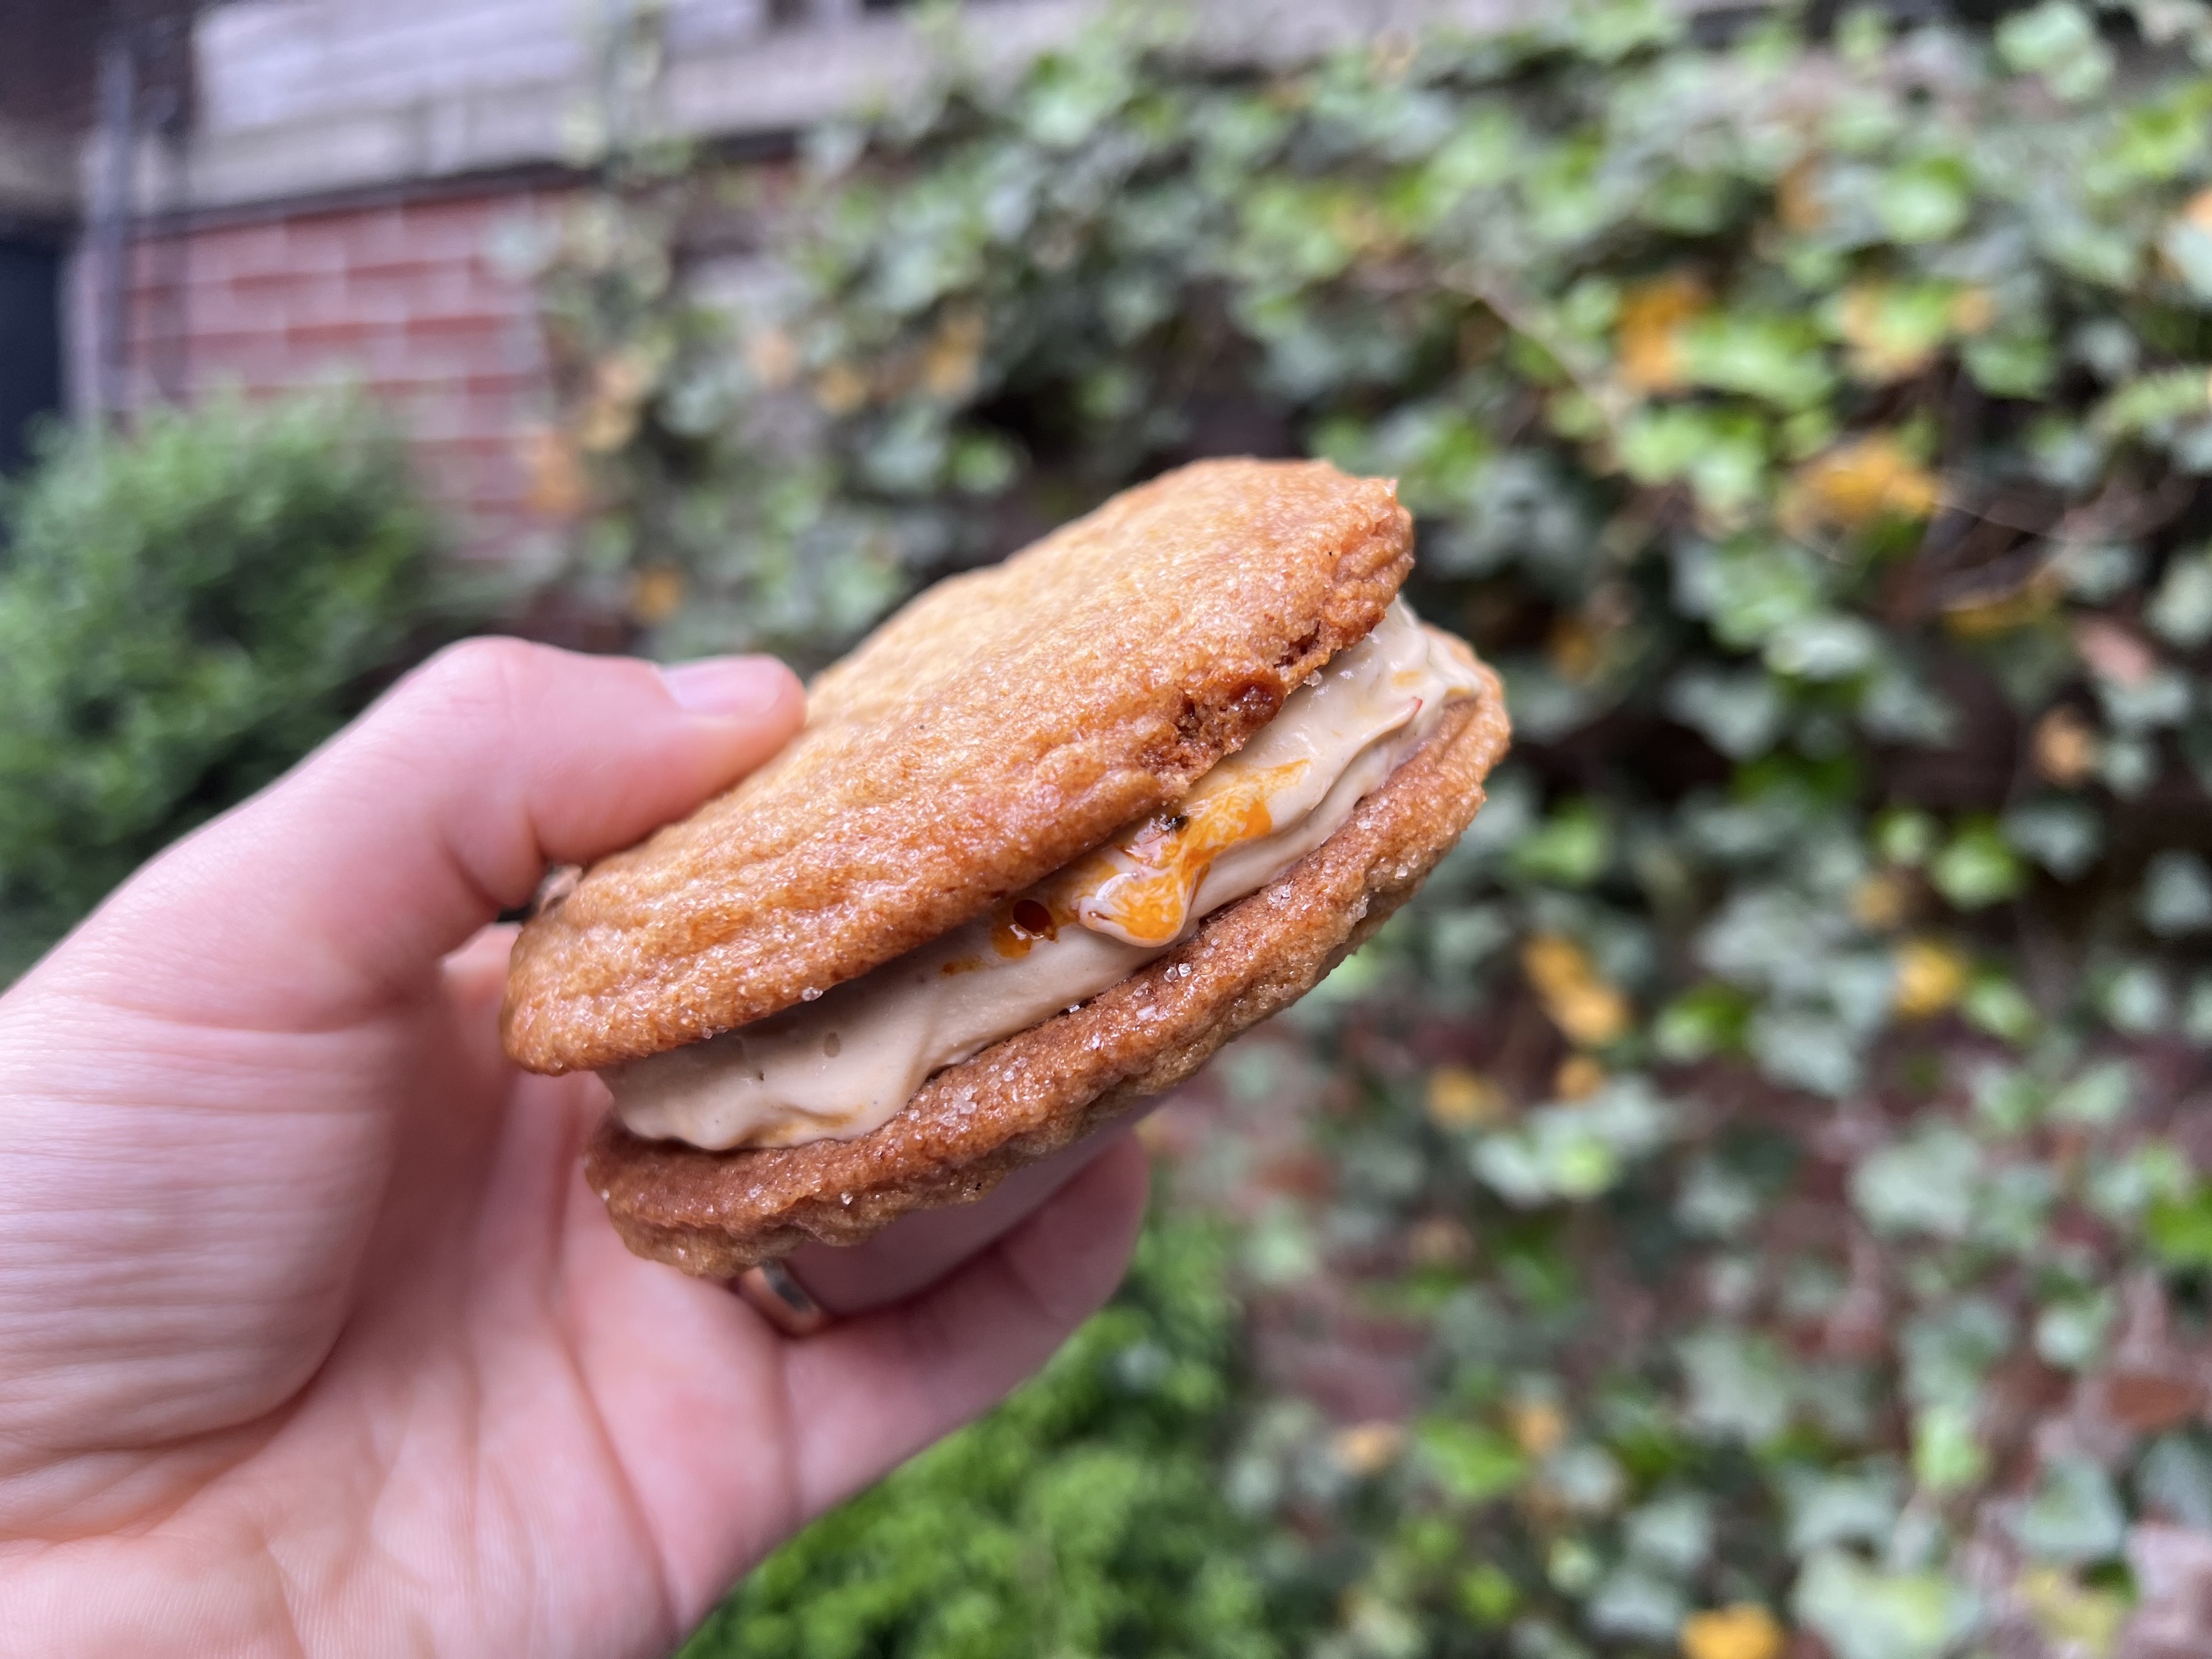 Fly By Jing is serving a chili crunch ice cream sandwich in NYC